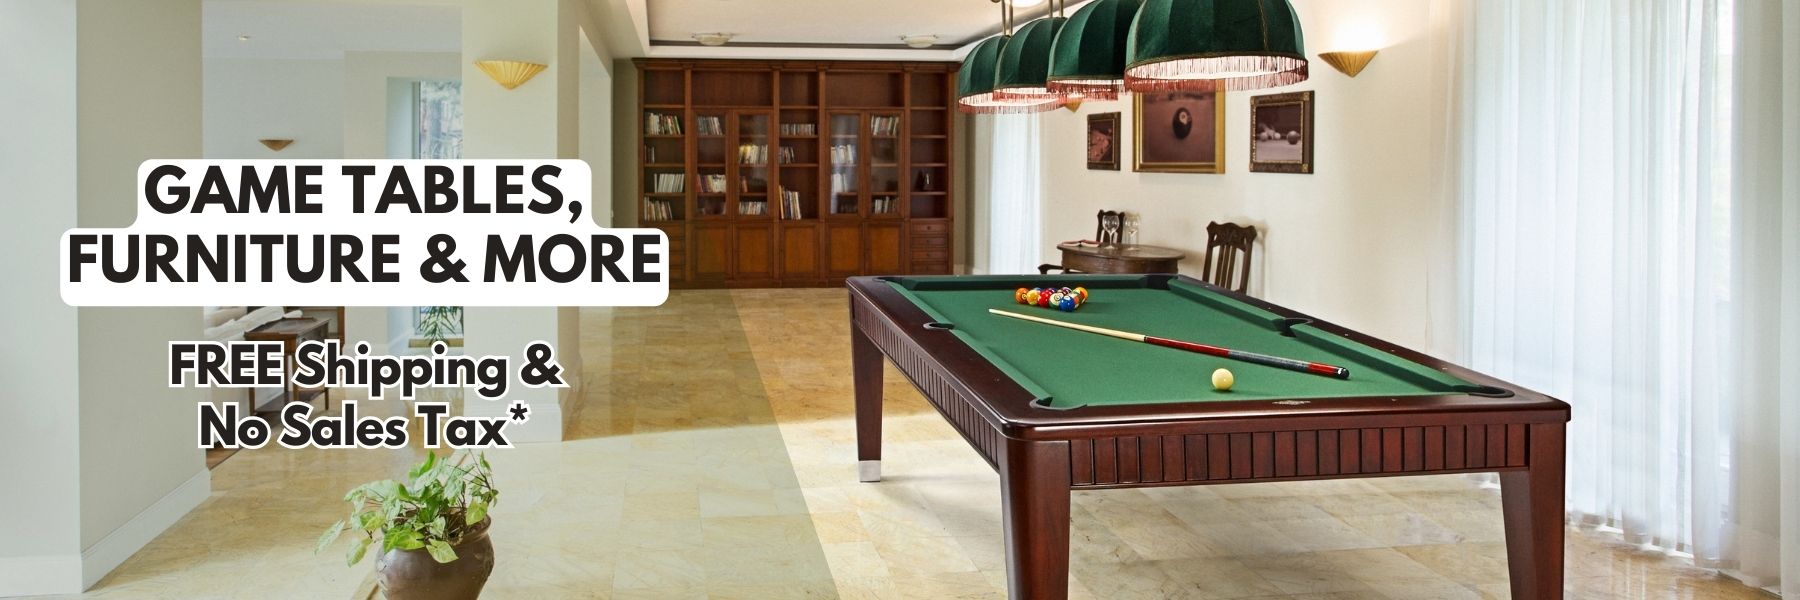 Game Room Spot, your one shop for all things game room, game tables, furniture and more.